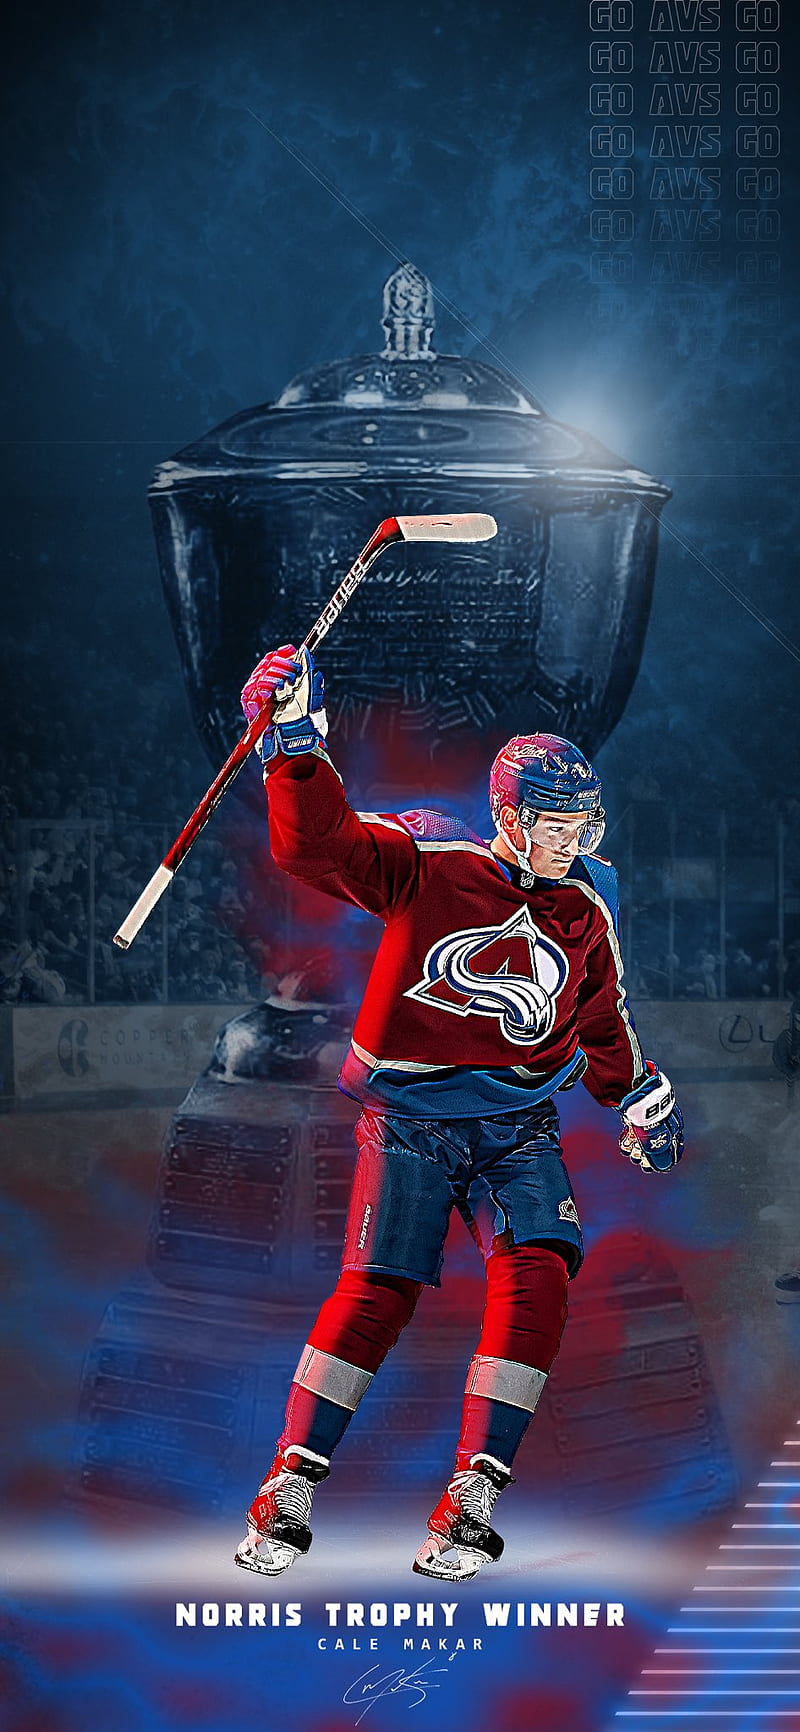 Colorado Avalanche 2022 Stanley Cup Champions Logos and Merchandise   SportsLogosNet News